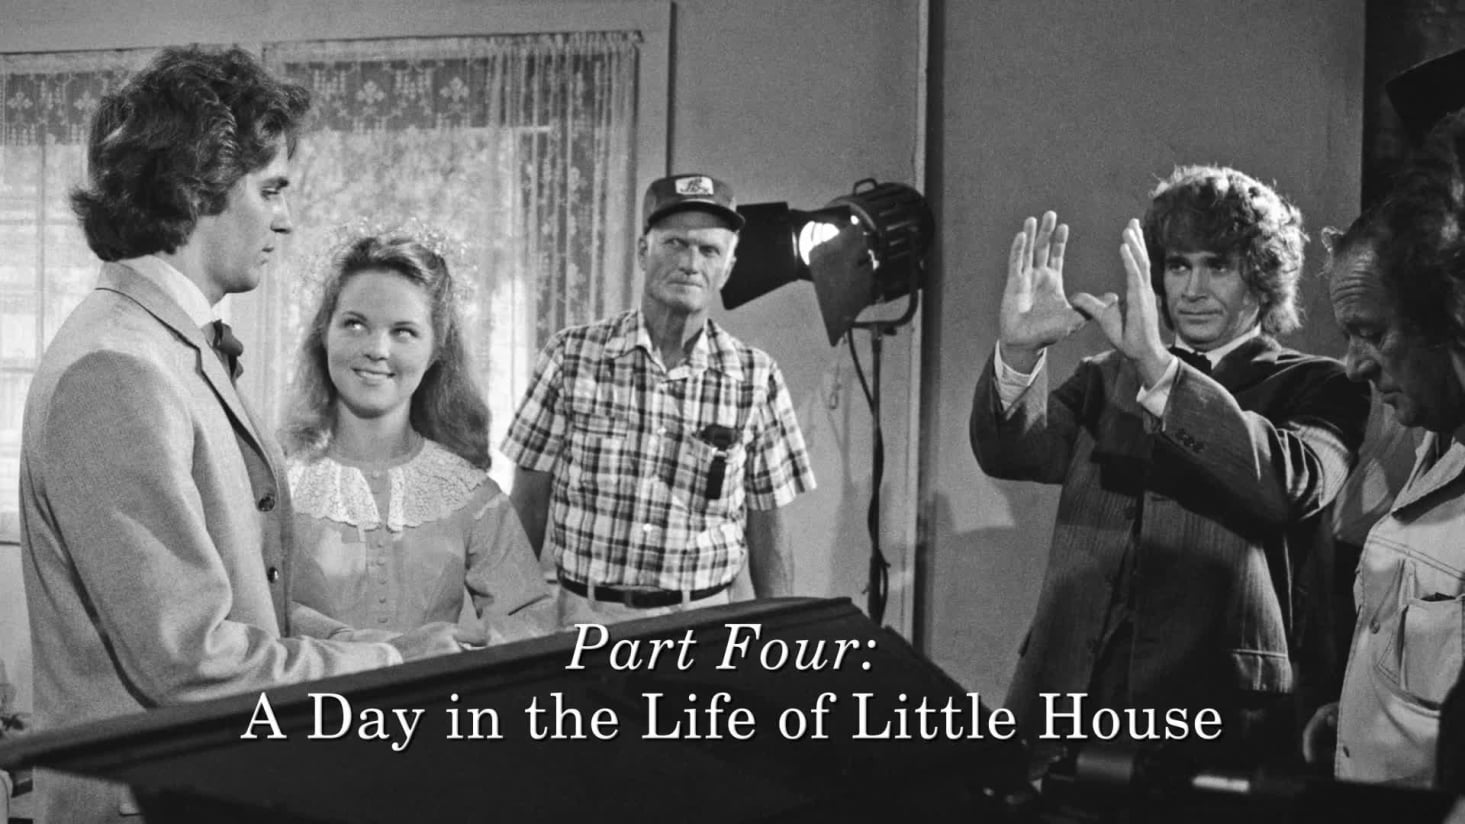 A Day in the Life of Little House